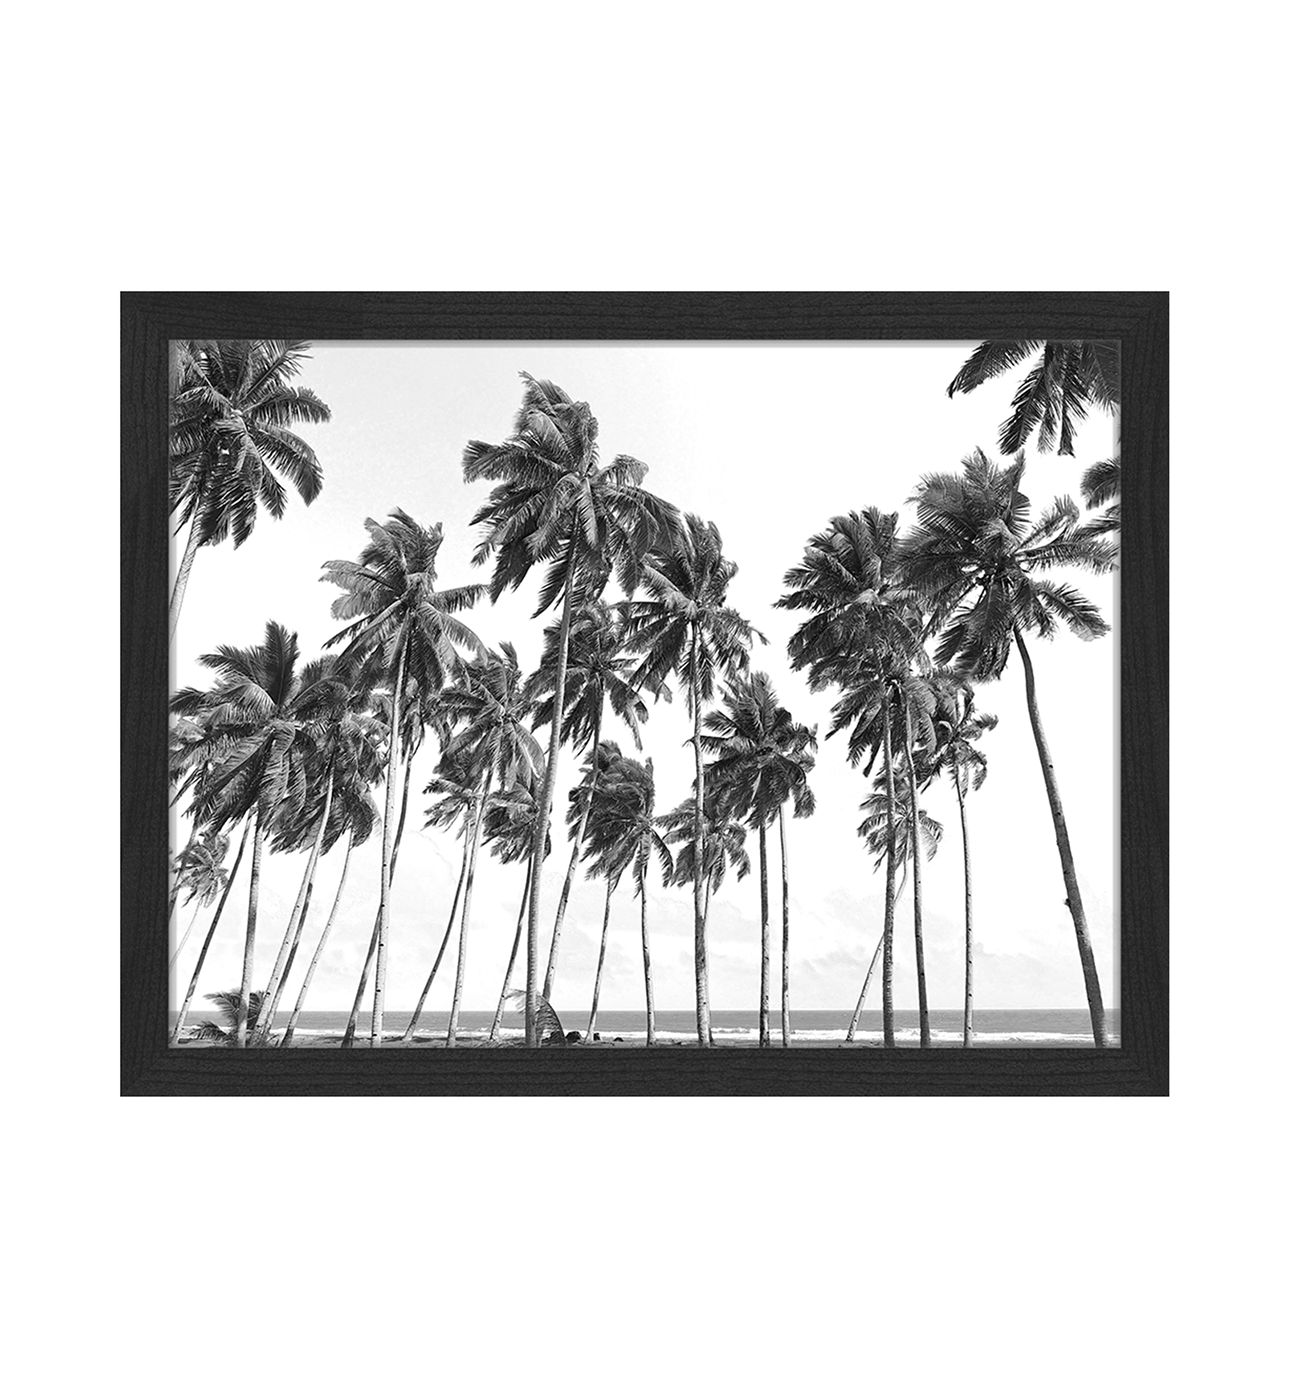 Coconut Trees image. Wall art print with frame.